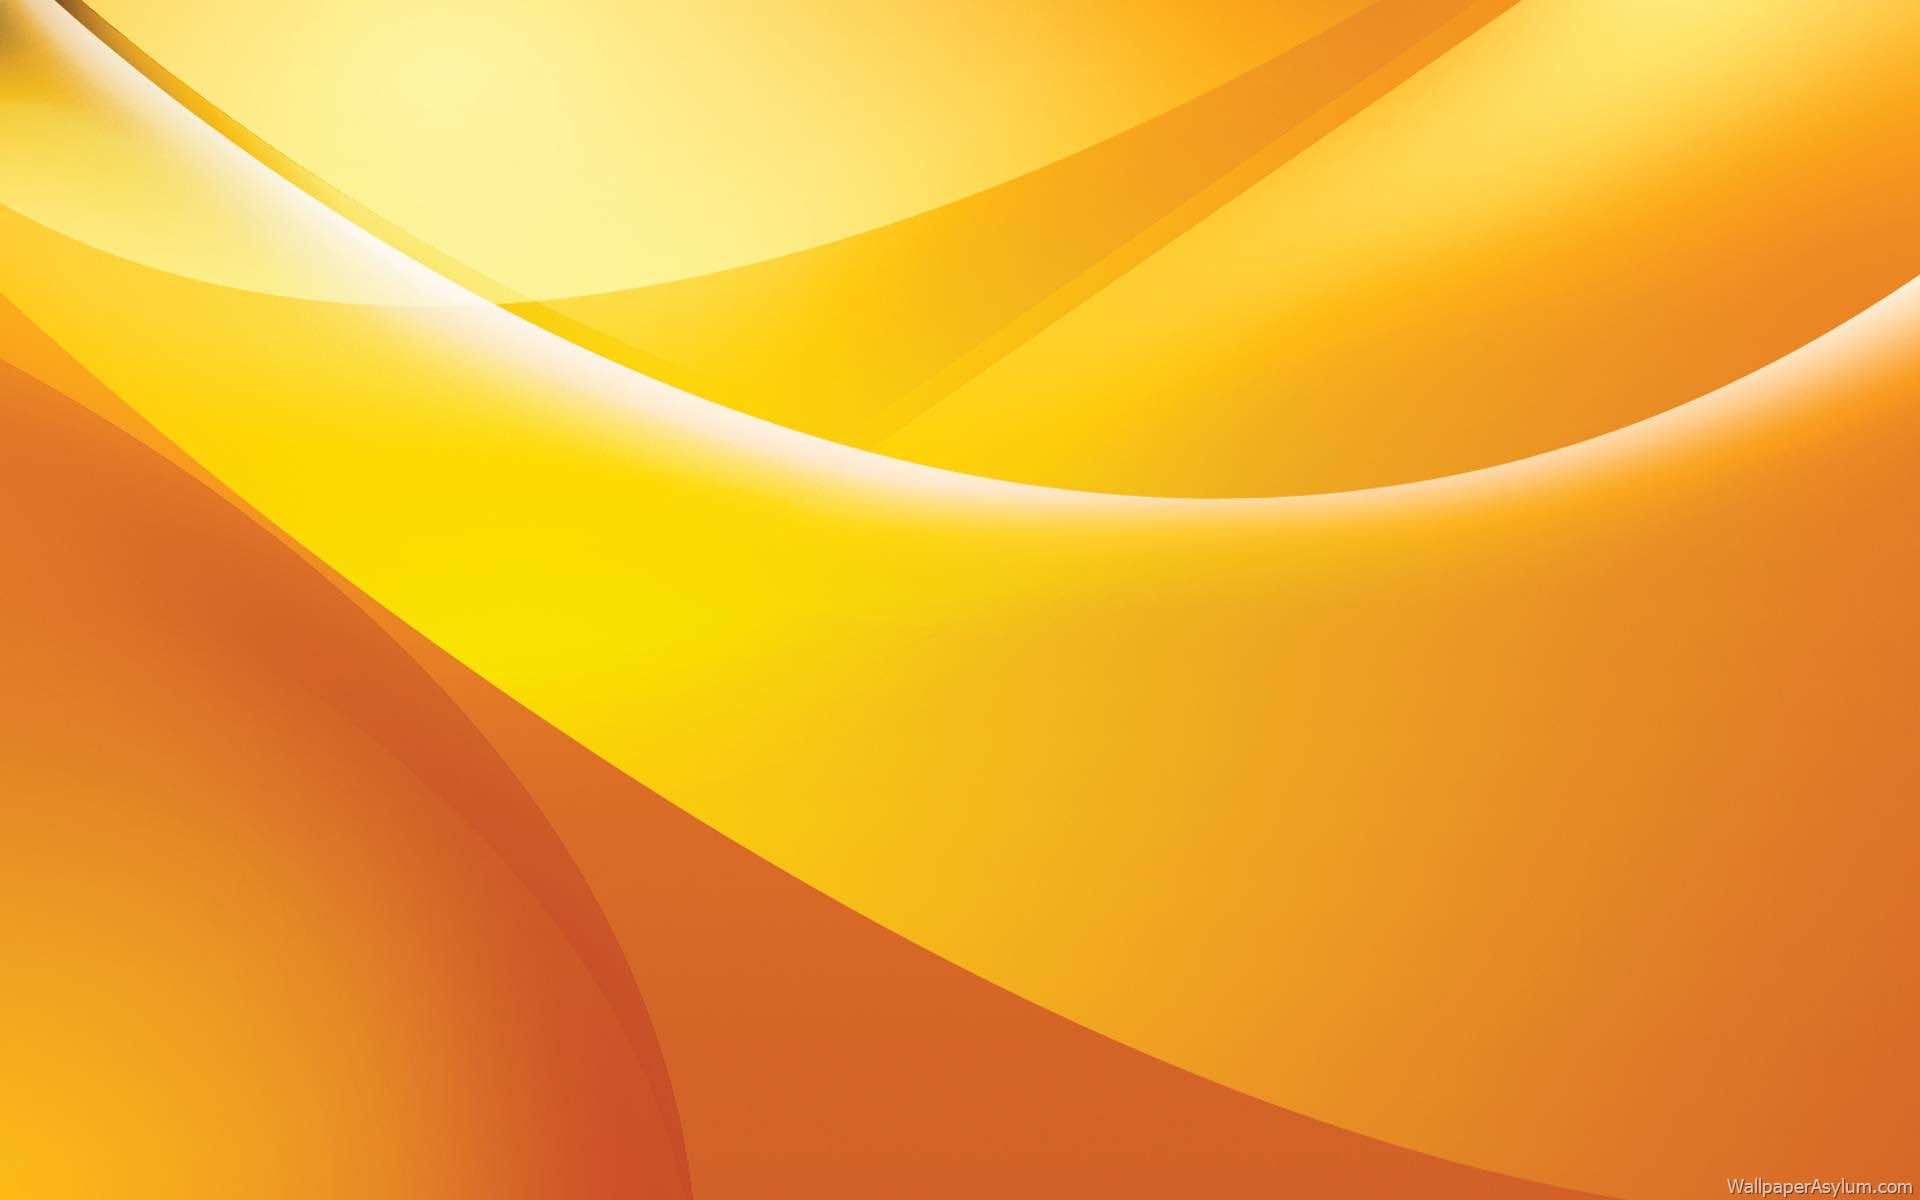 Download These 42 Yellow Wallpapers in High Definition For Free